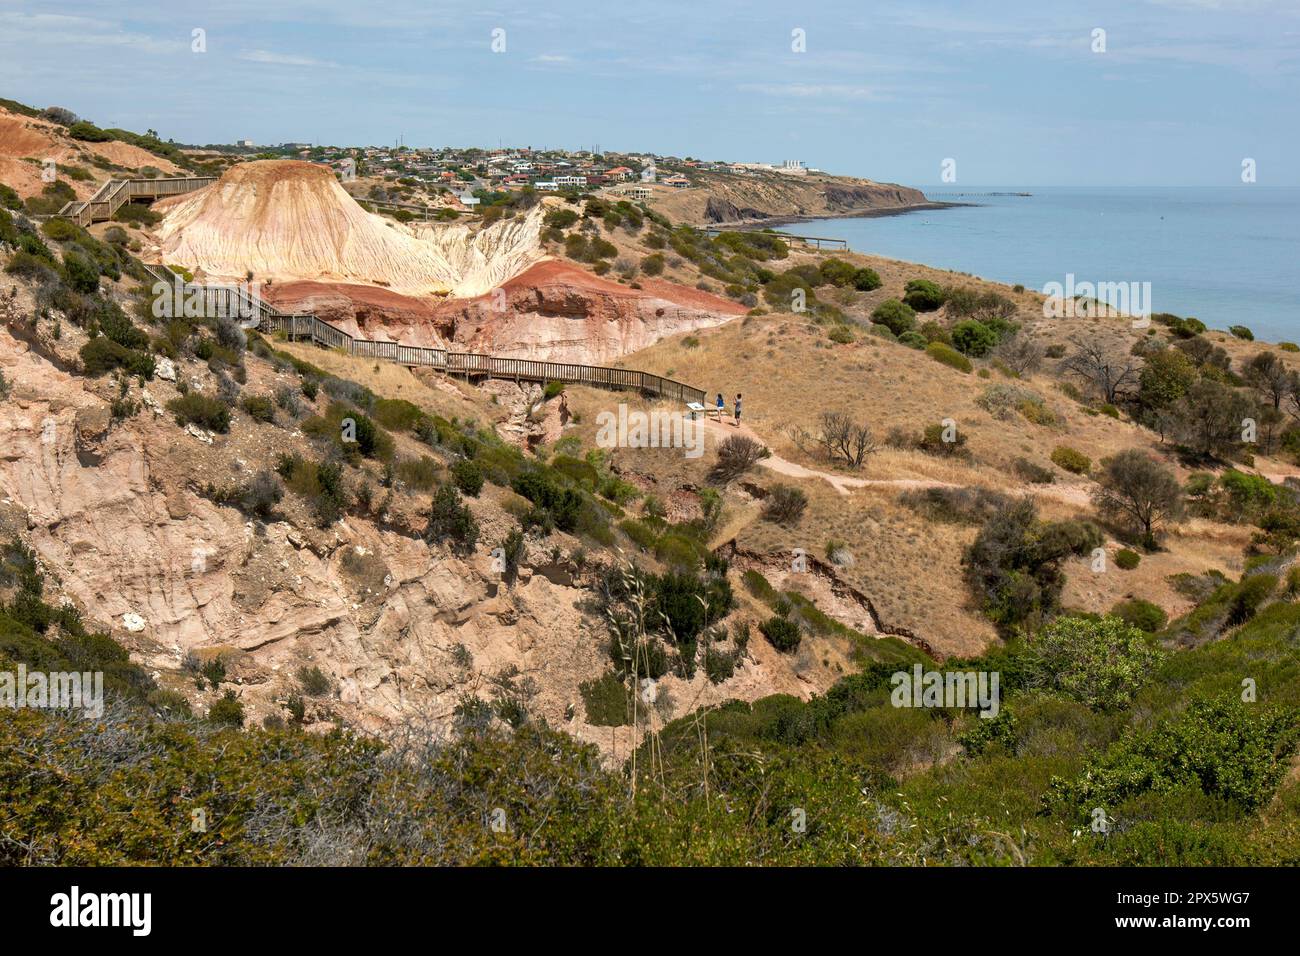 A view within the Hallett Cove Conservation Park at Adelaide in South Australia looking towards the famous Sugarloaf. Stock Photo